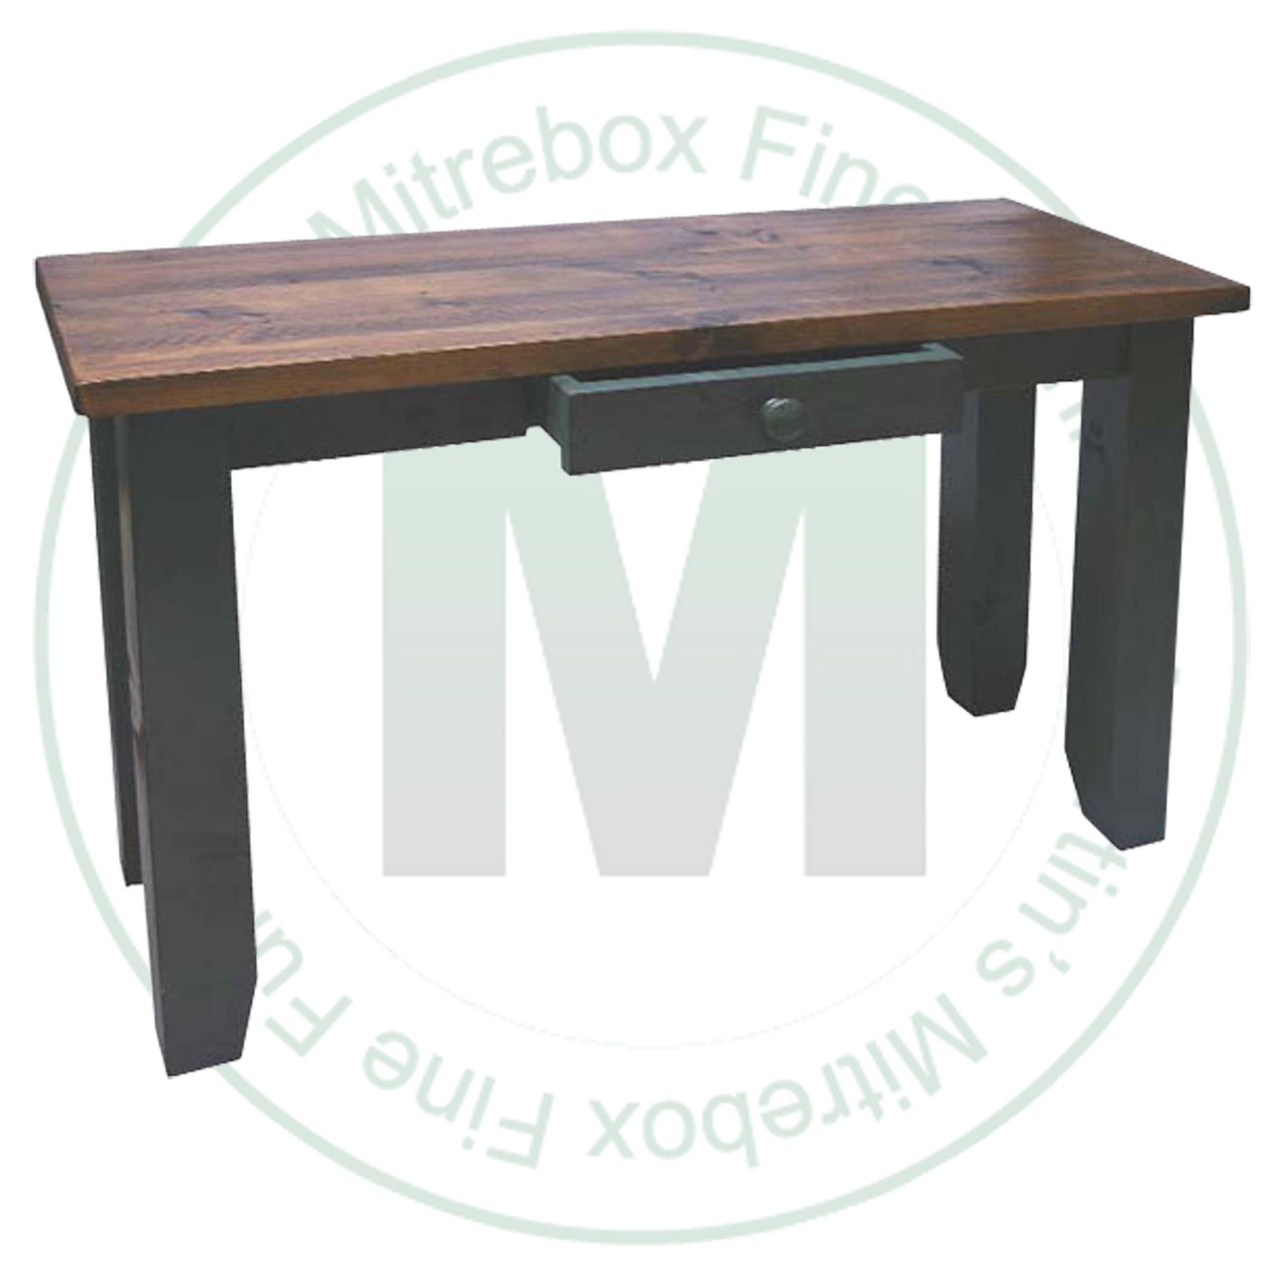 Pine Dakota Sofa Table 18''D x 48''W x 30''H With Drawer And 3.5'' Legs